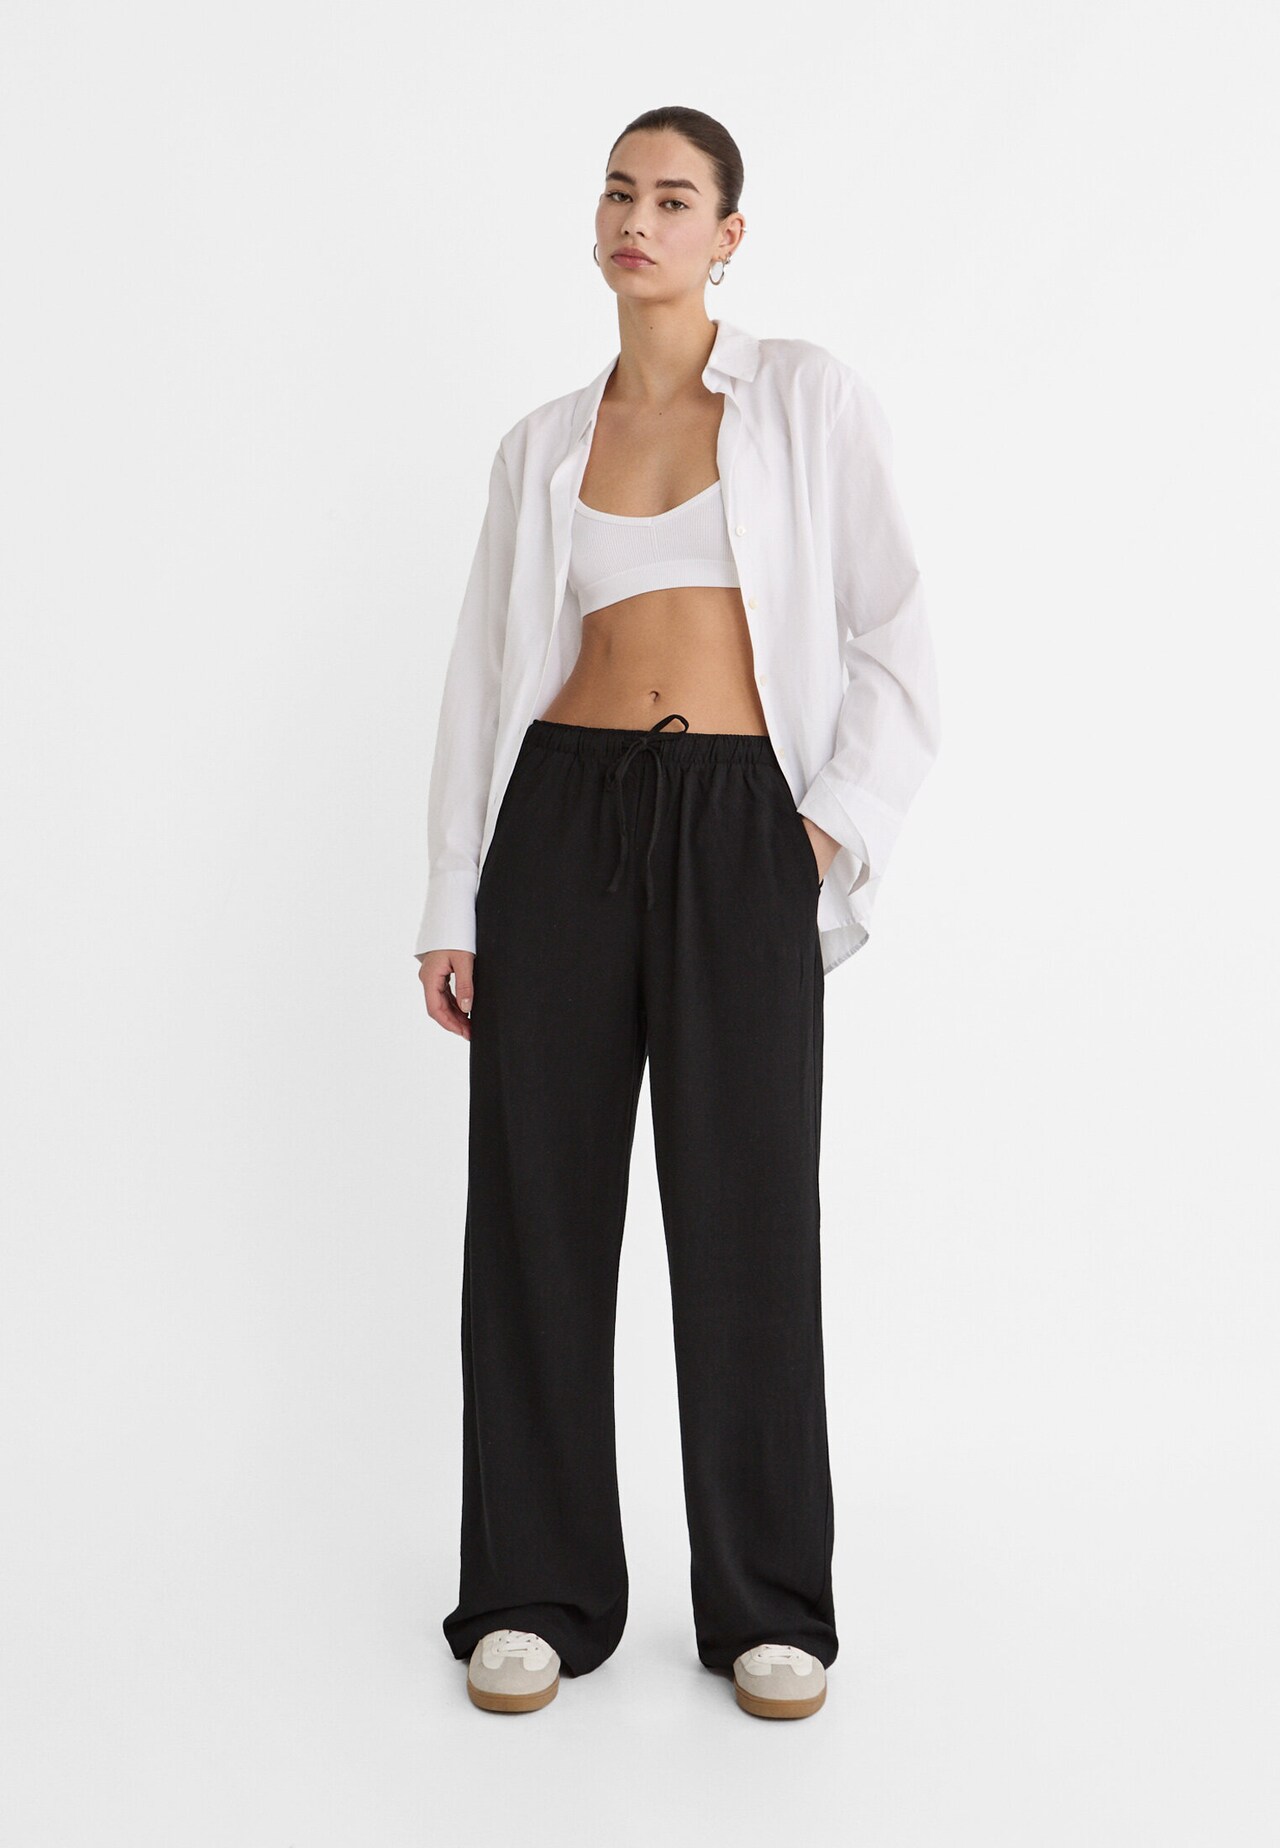 Loose-fitting linen blend trousers - Women's fashion